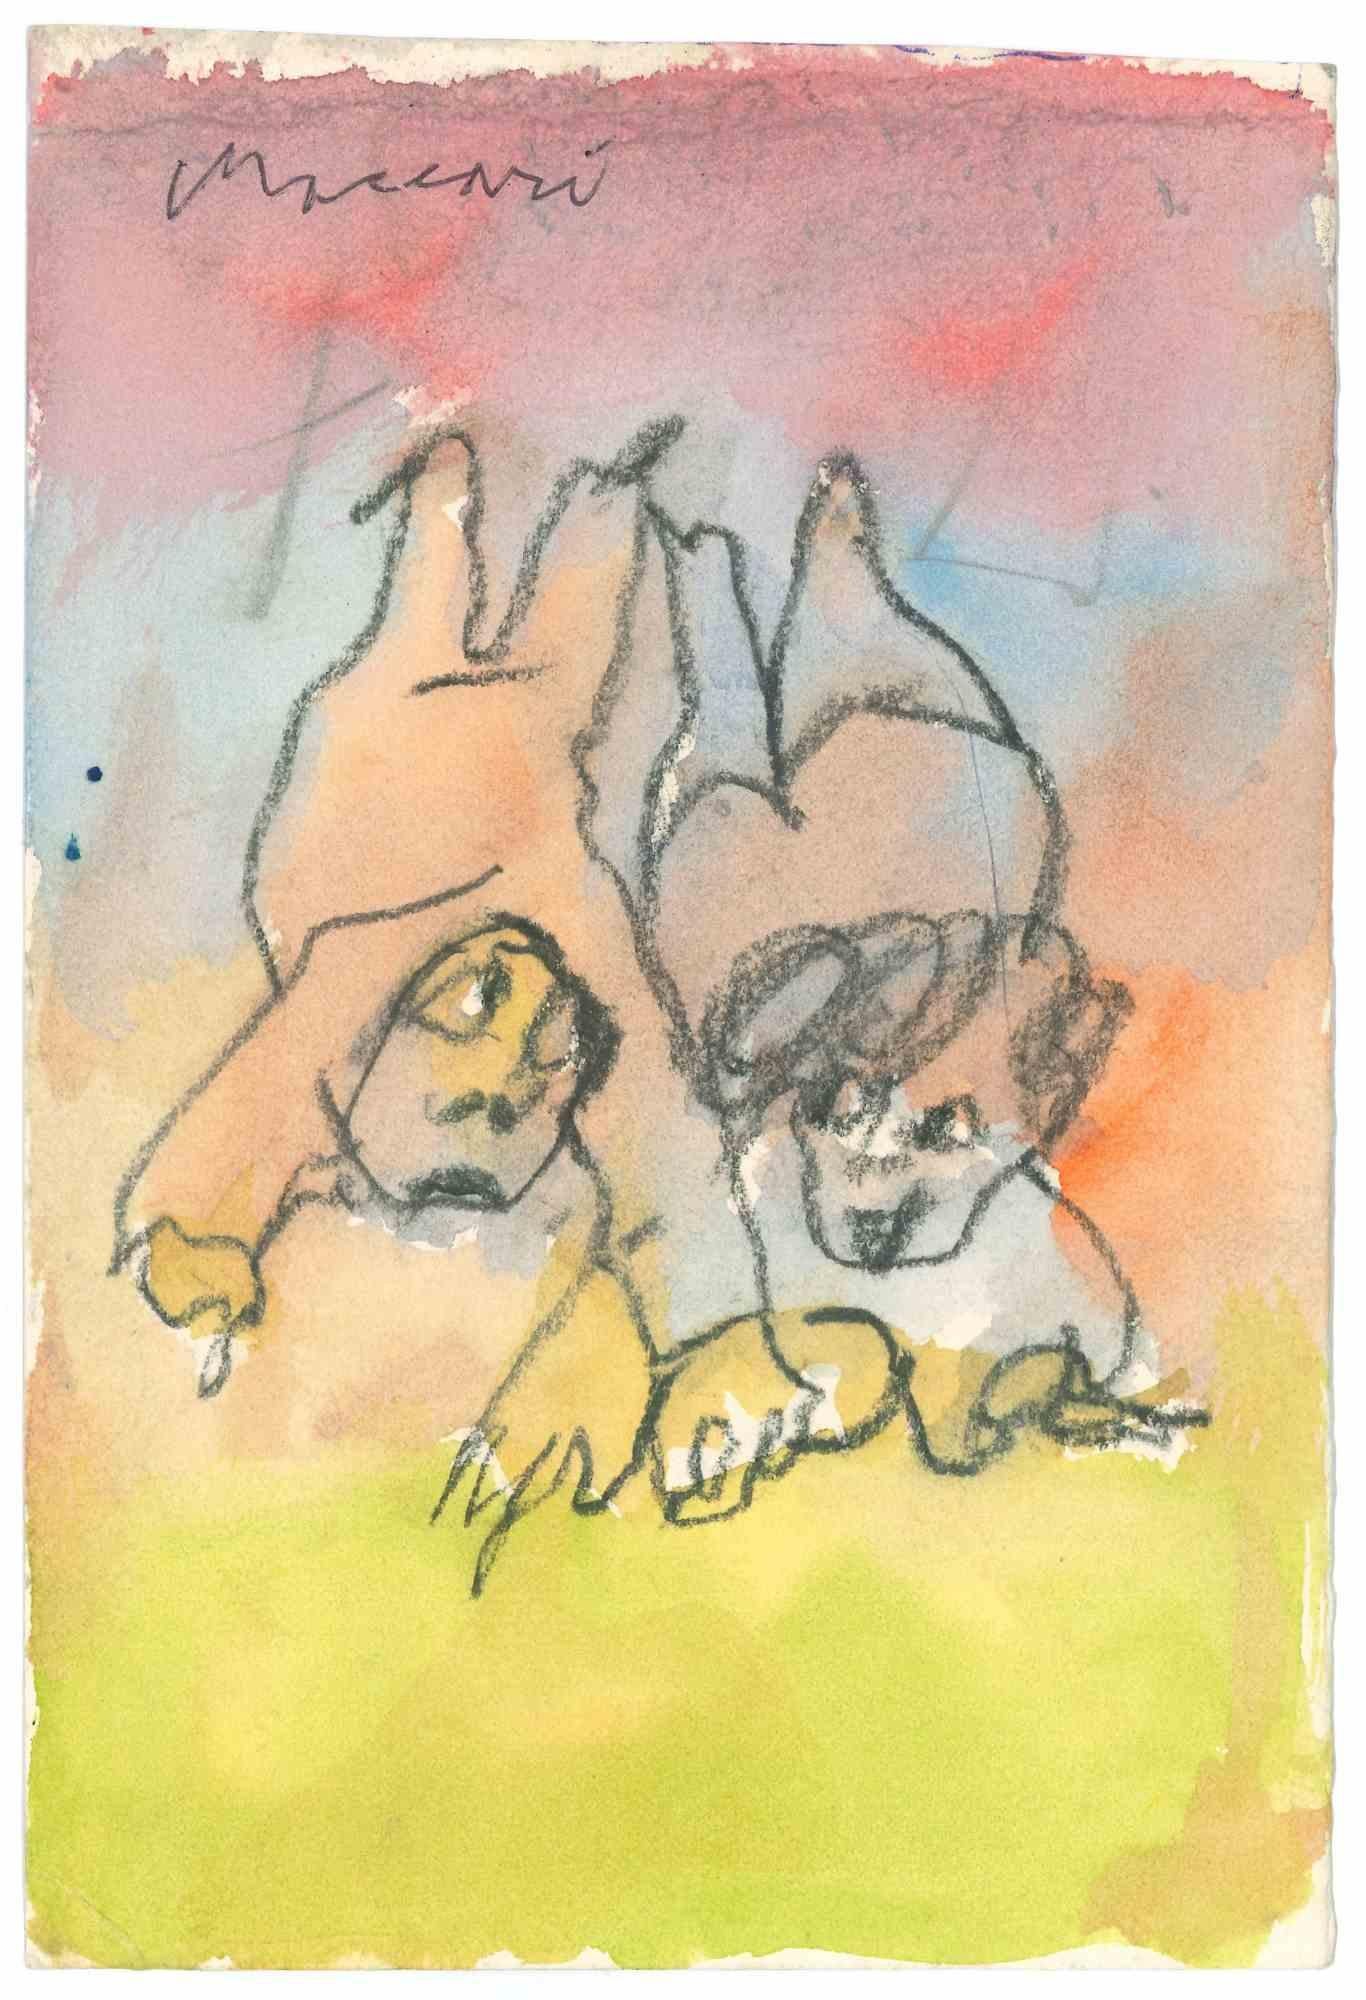 Jumping is a charcoal and watercolor drawing realized by Mino Maccari  (1924-1989) in the Mid-20th Century.

Hand-signed.

Good conditions with slight foxing.

Mino Maccari (Siena, 1924-Rome, June 16, 1989) was an Italian writer, painter, engraver